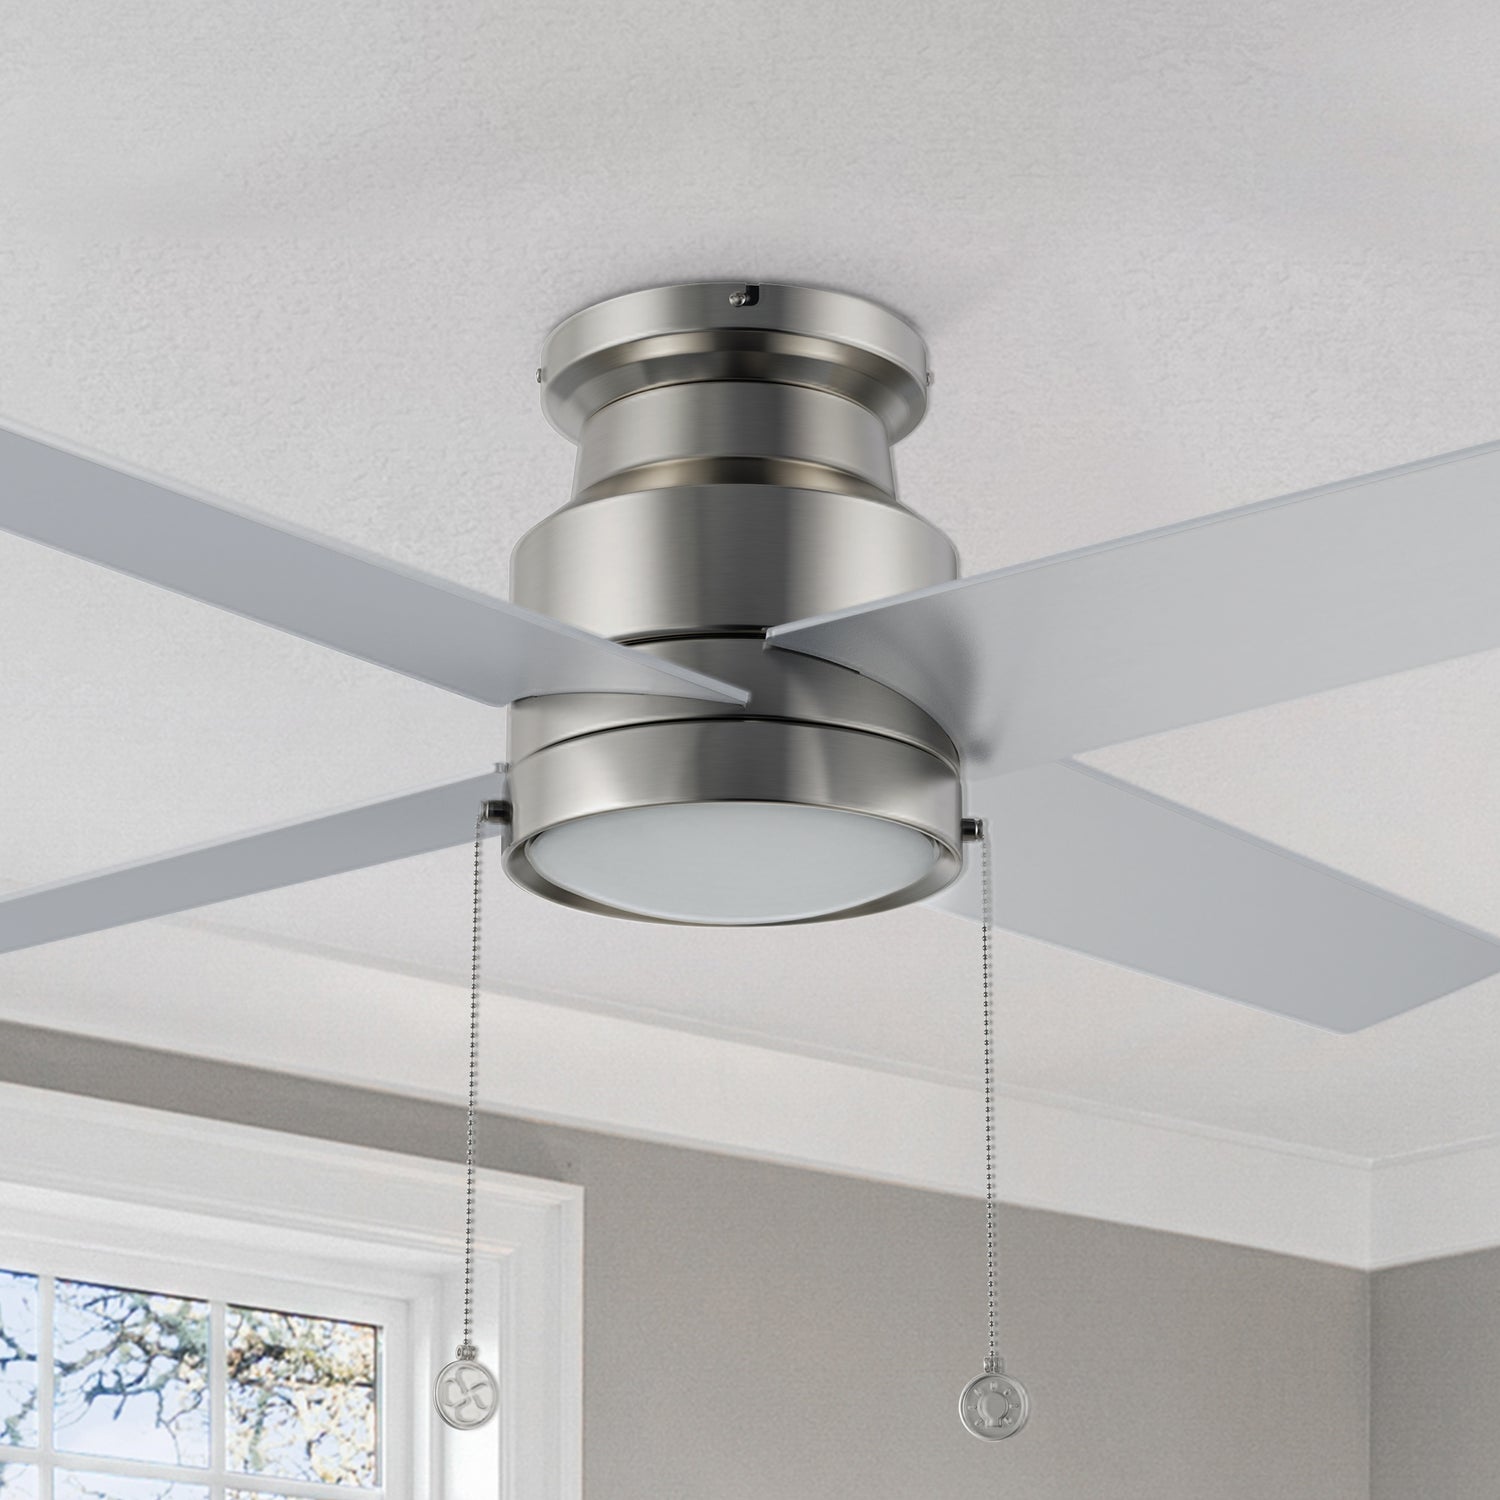 This Luft 52” flush mount best ceiling fan with light and 4 blades is for indoor space.